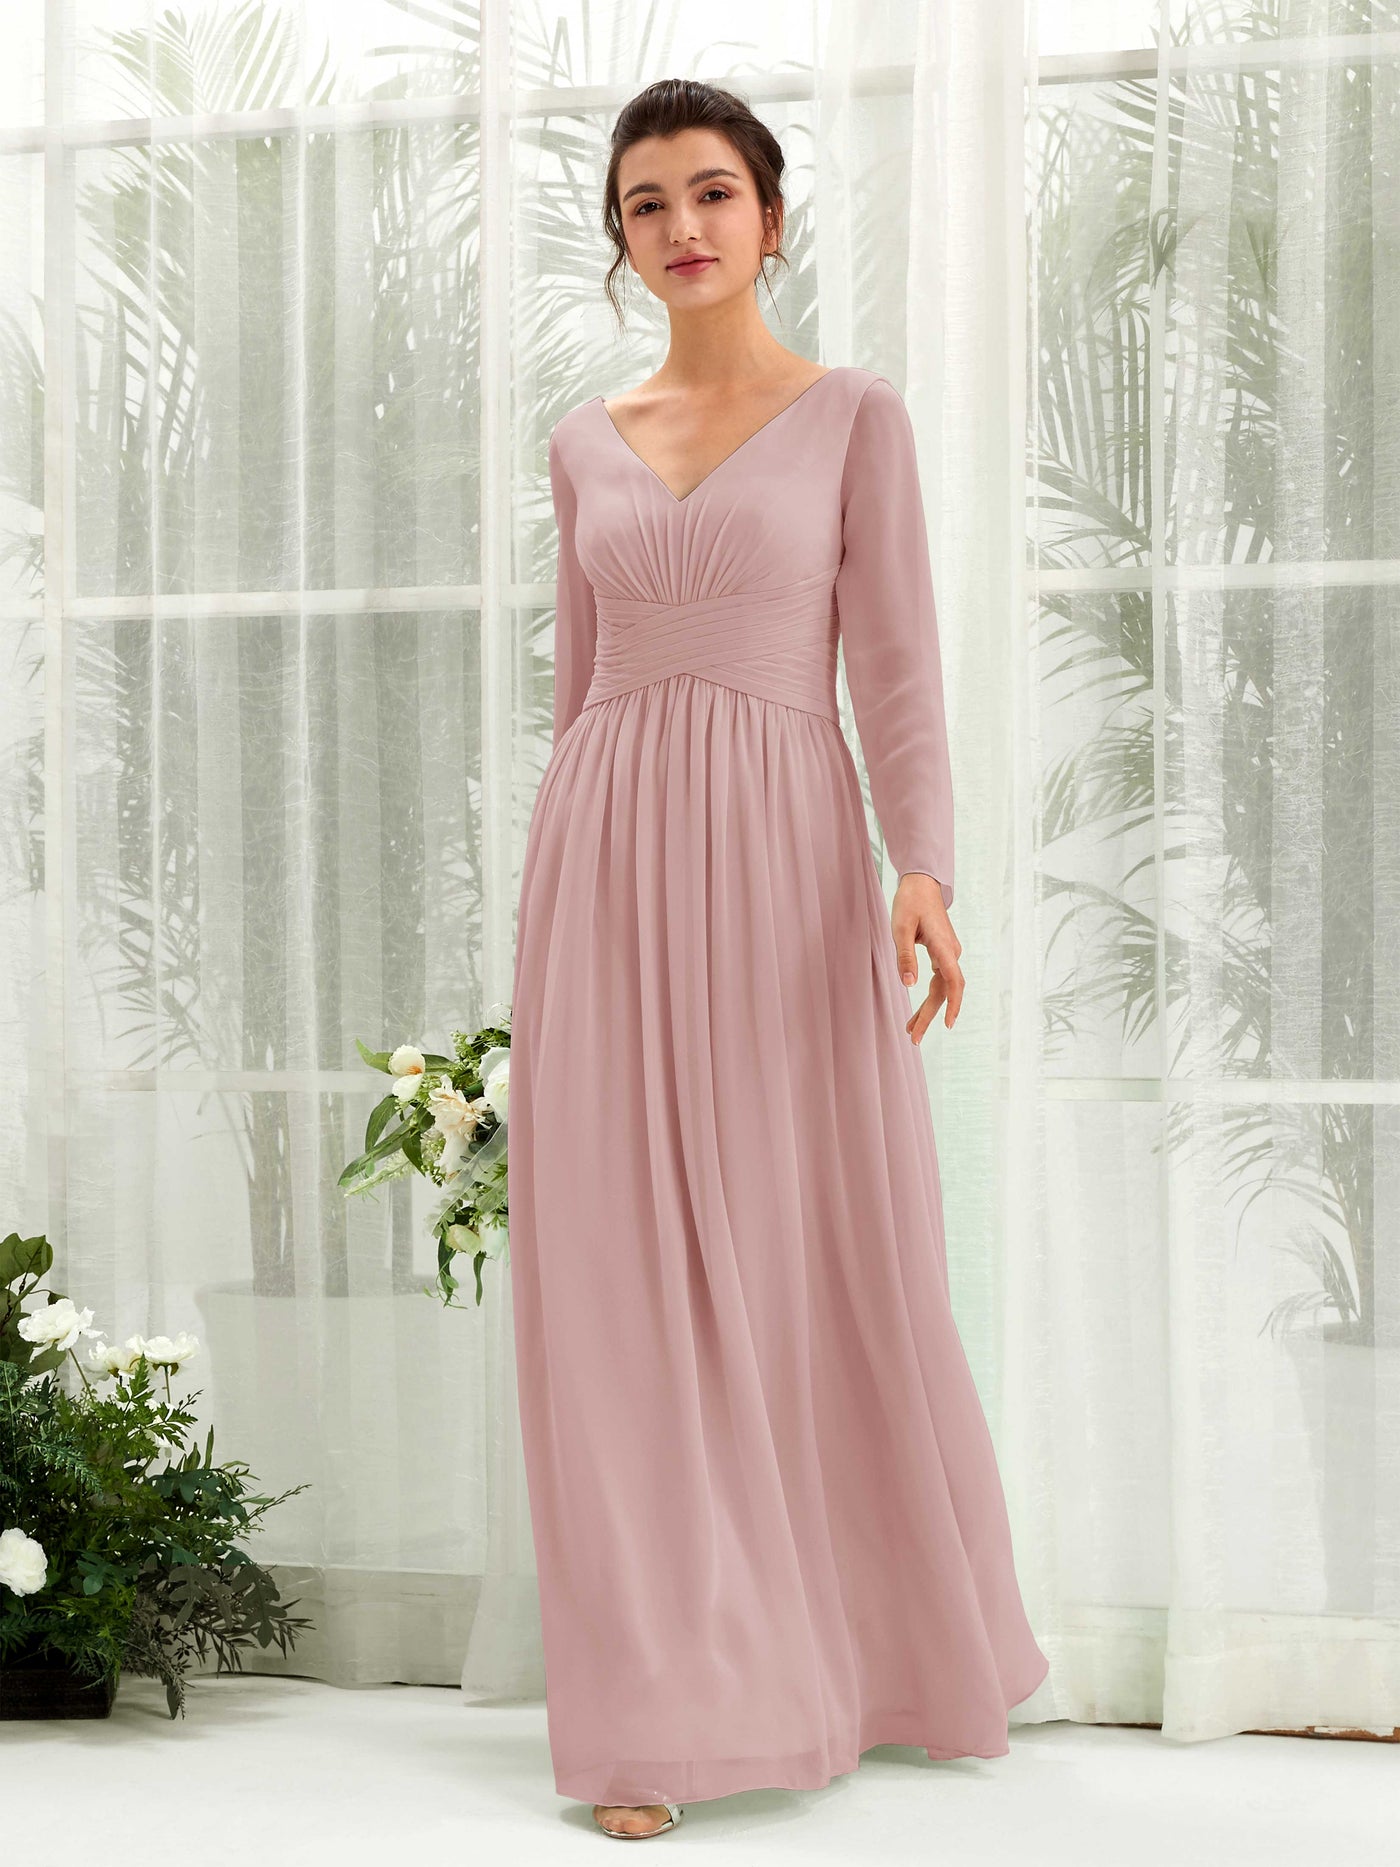 Dusty Rose Bridesmaid Dresses Bridesmaid Dress A-line Chiffon V-neck Full Length Long Sleeves Wedding Party Dress (81220309)#color_dusty-rose